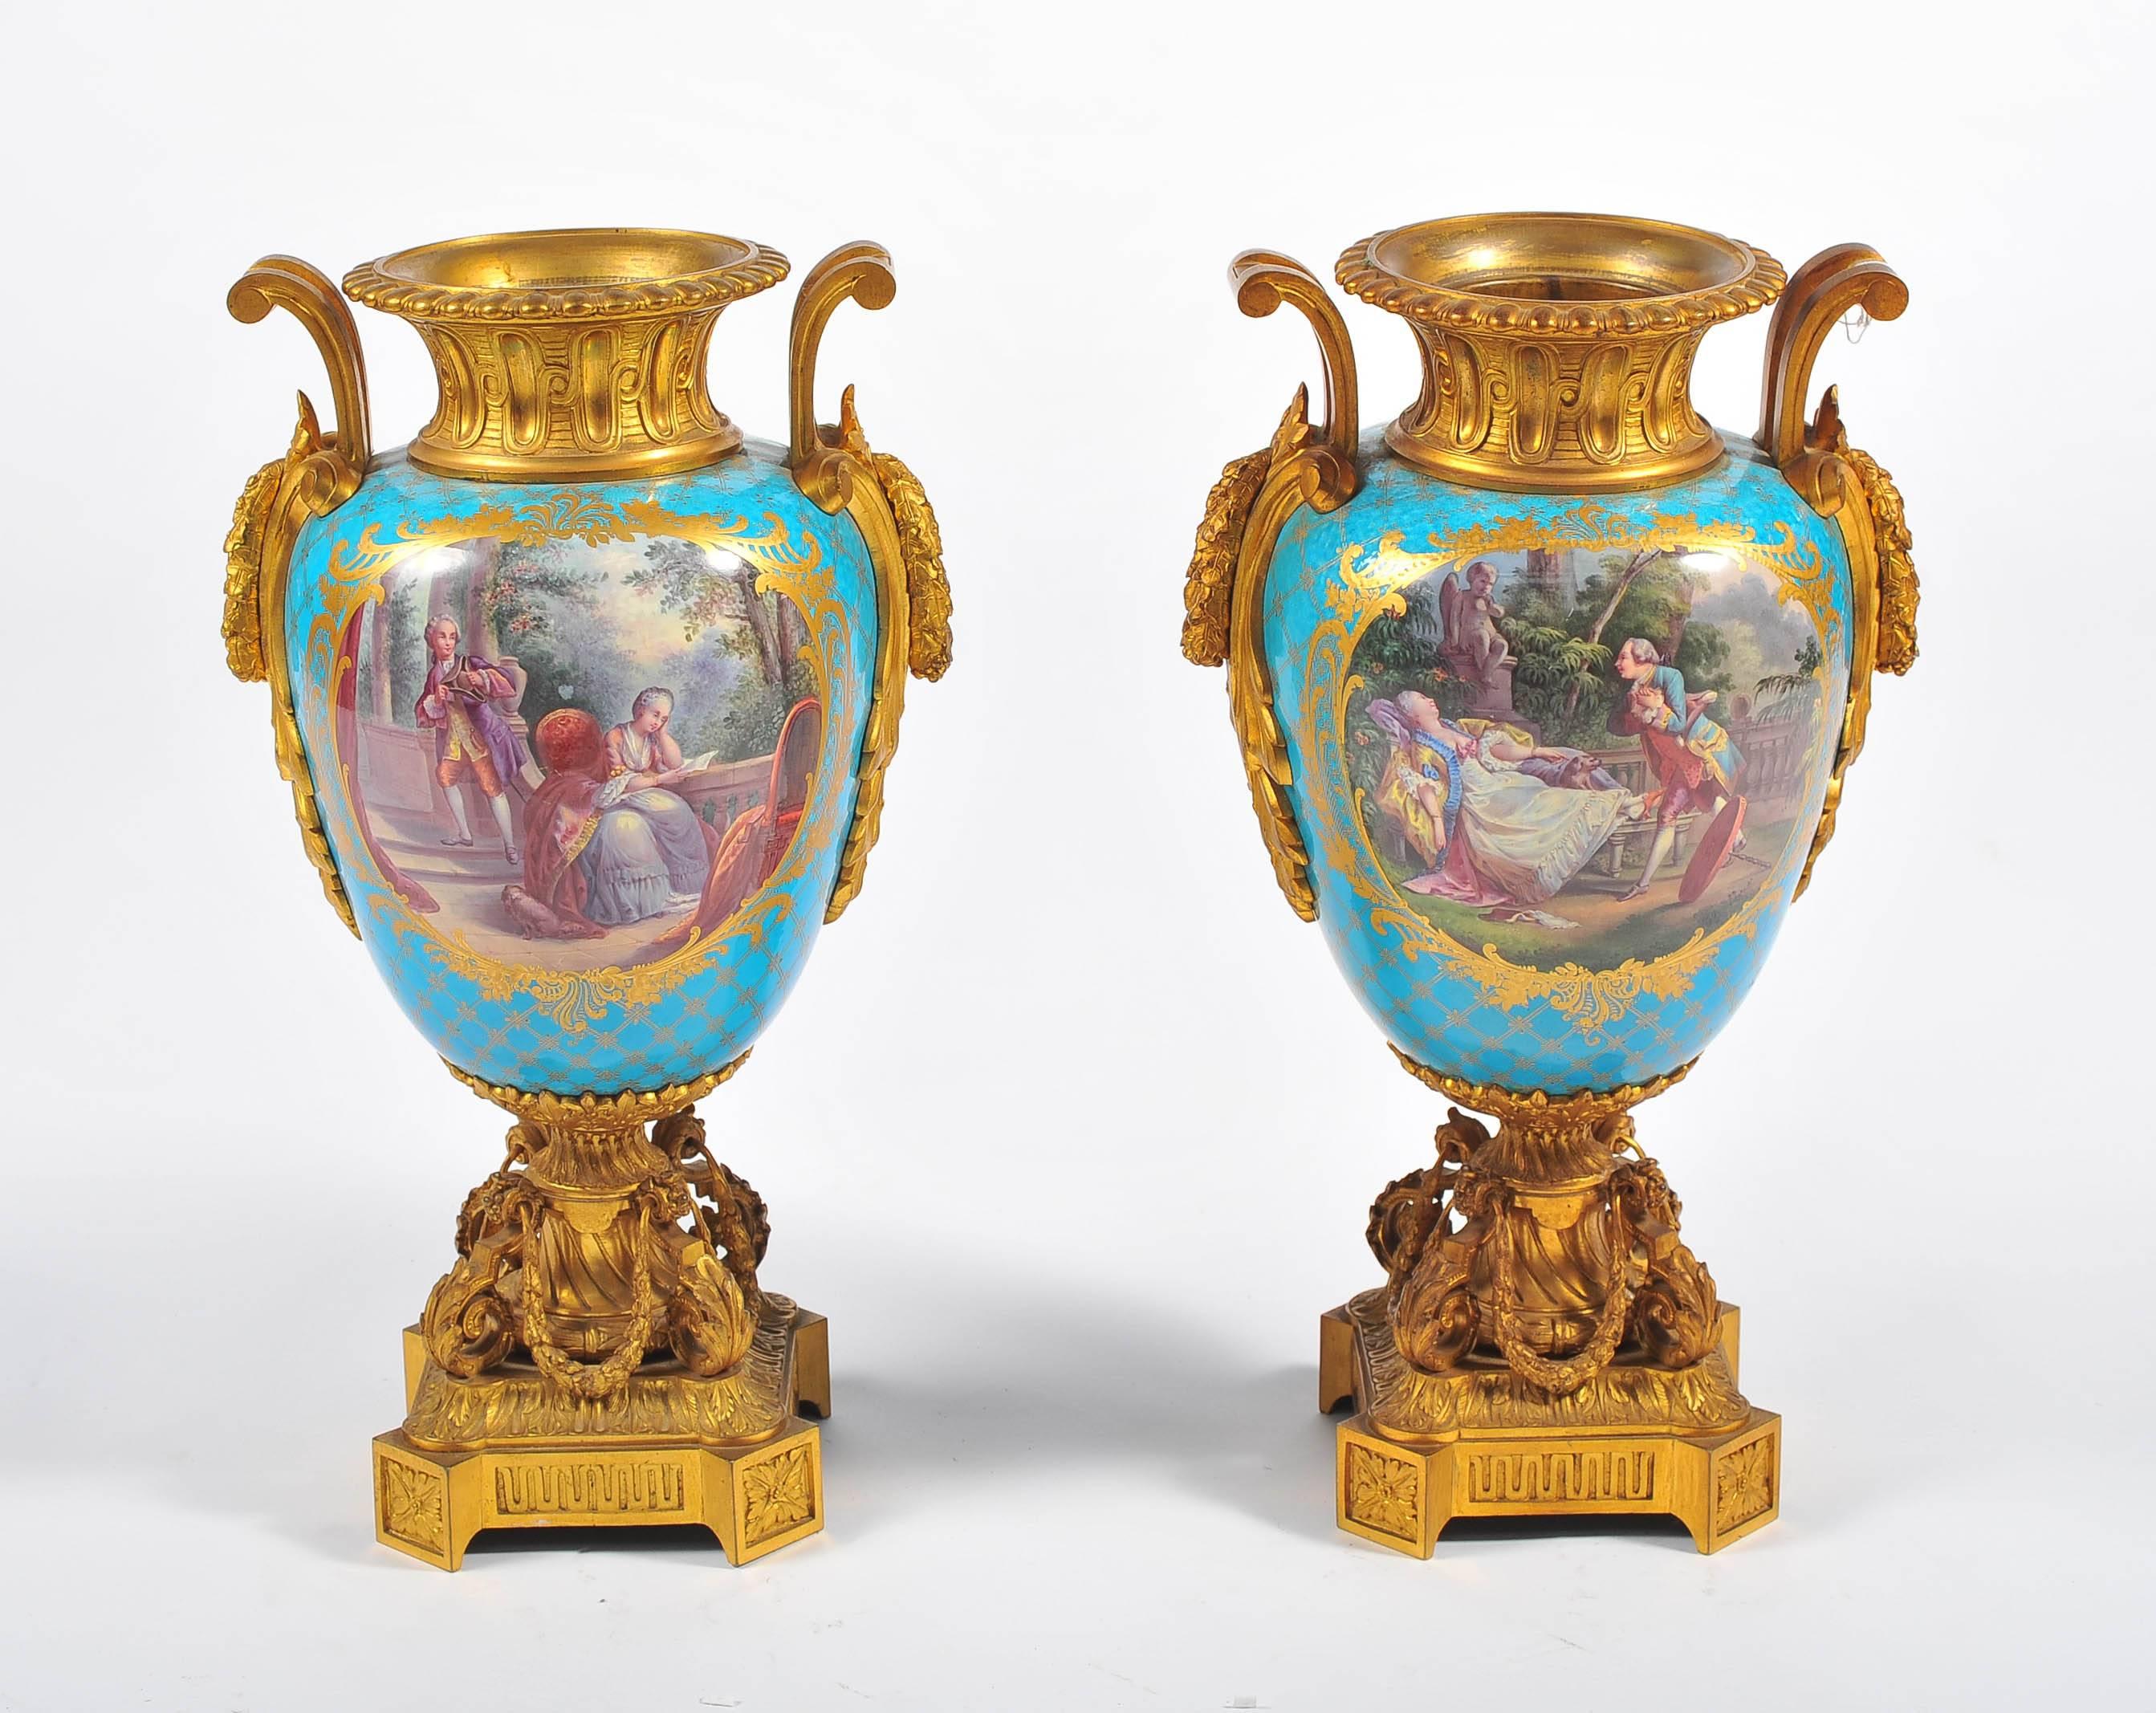 A fine quality pair of 19th century French 'Sevres' porcelain vases, each having wonderful gilded ormolu mounts. The classical romantic and cherub scenes set in turquoise background.